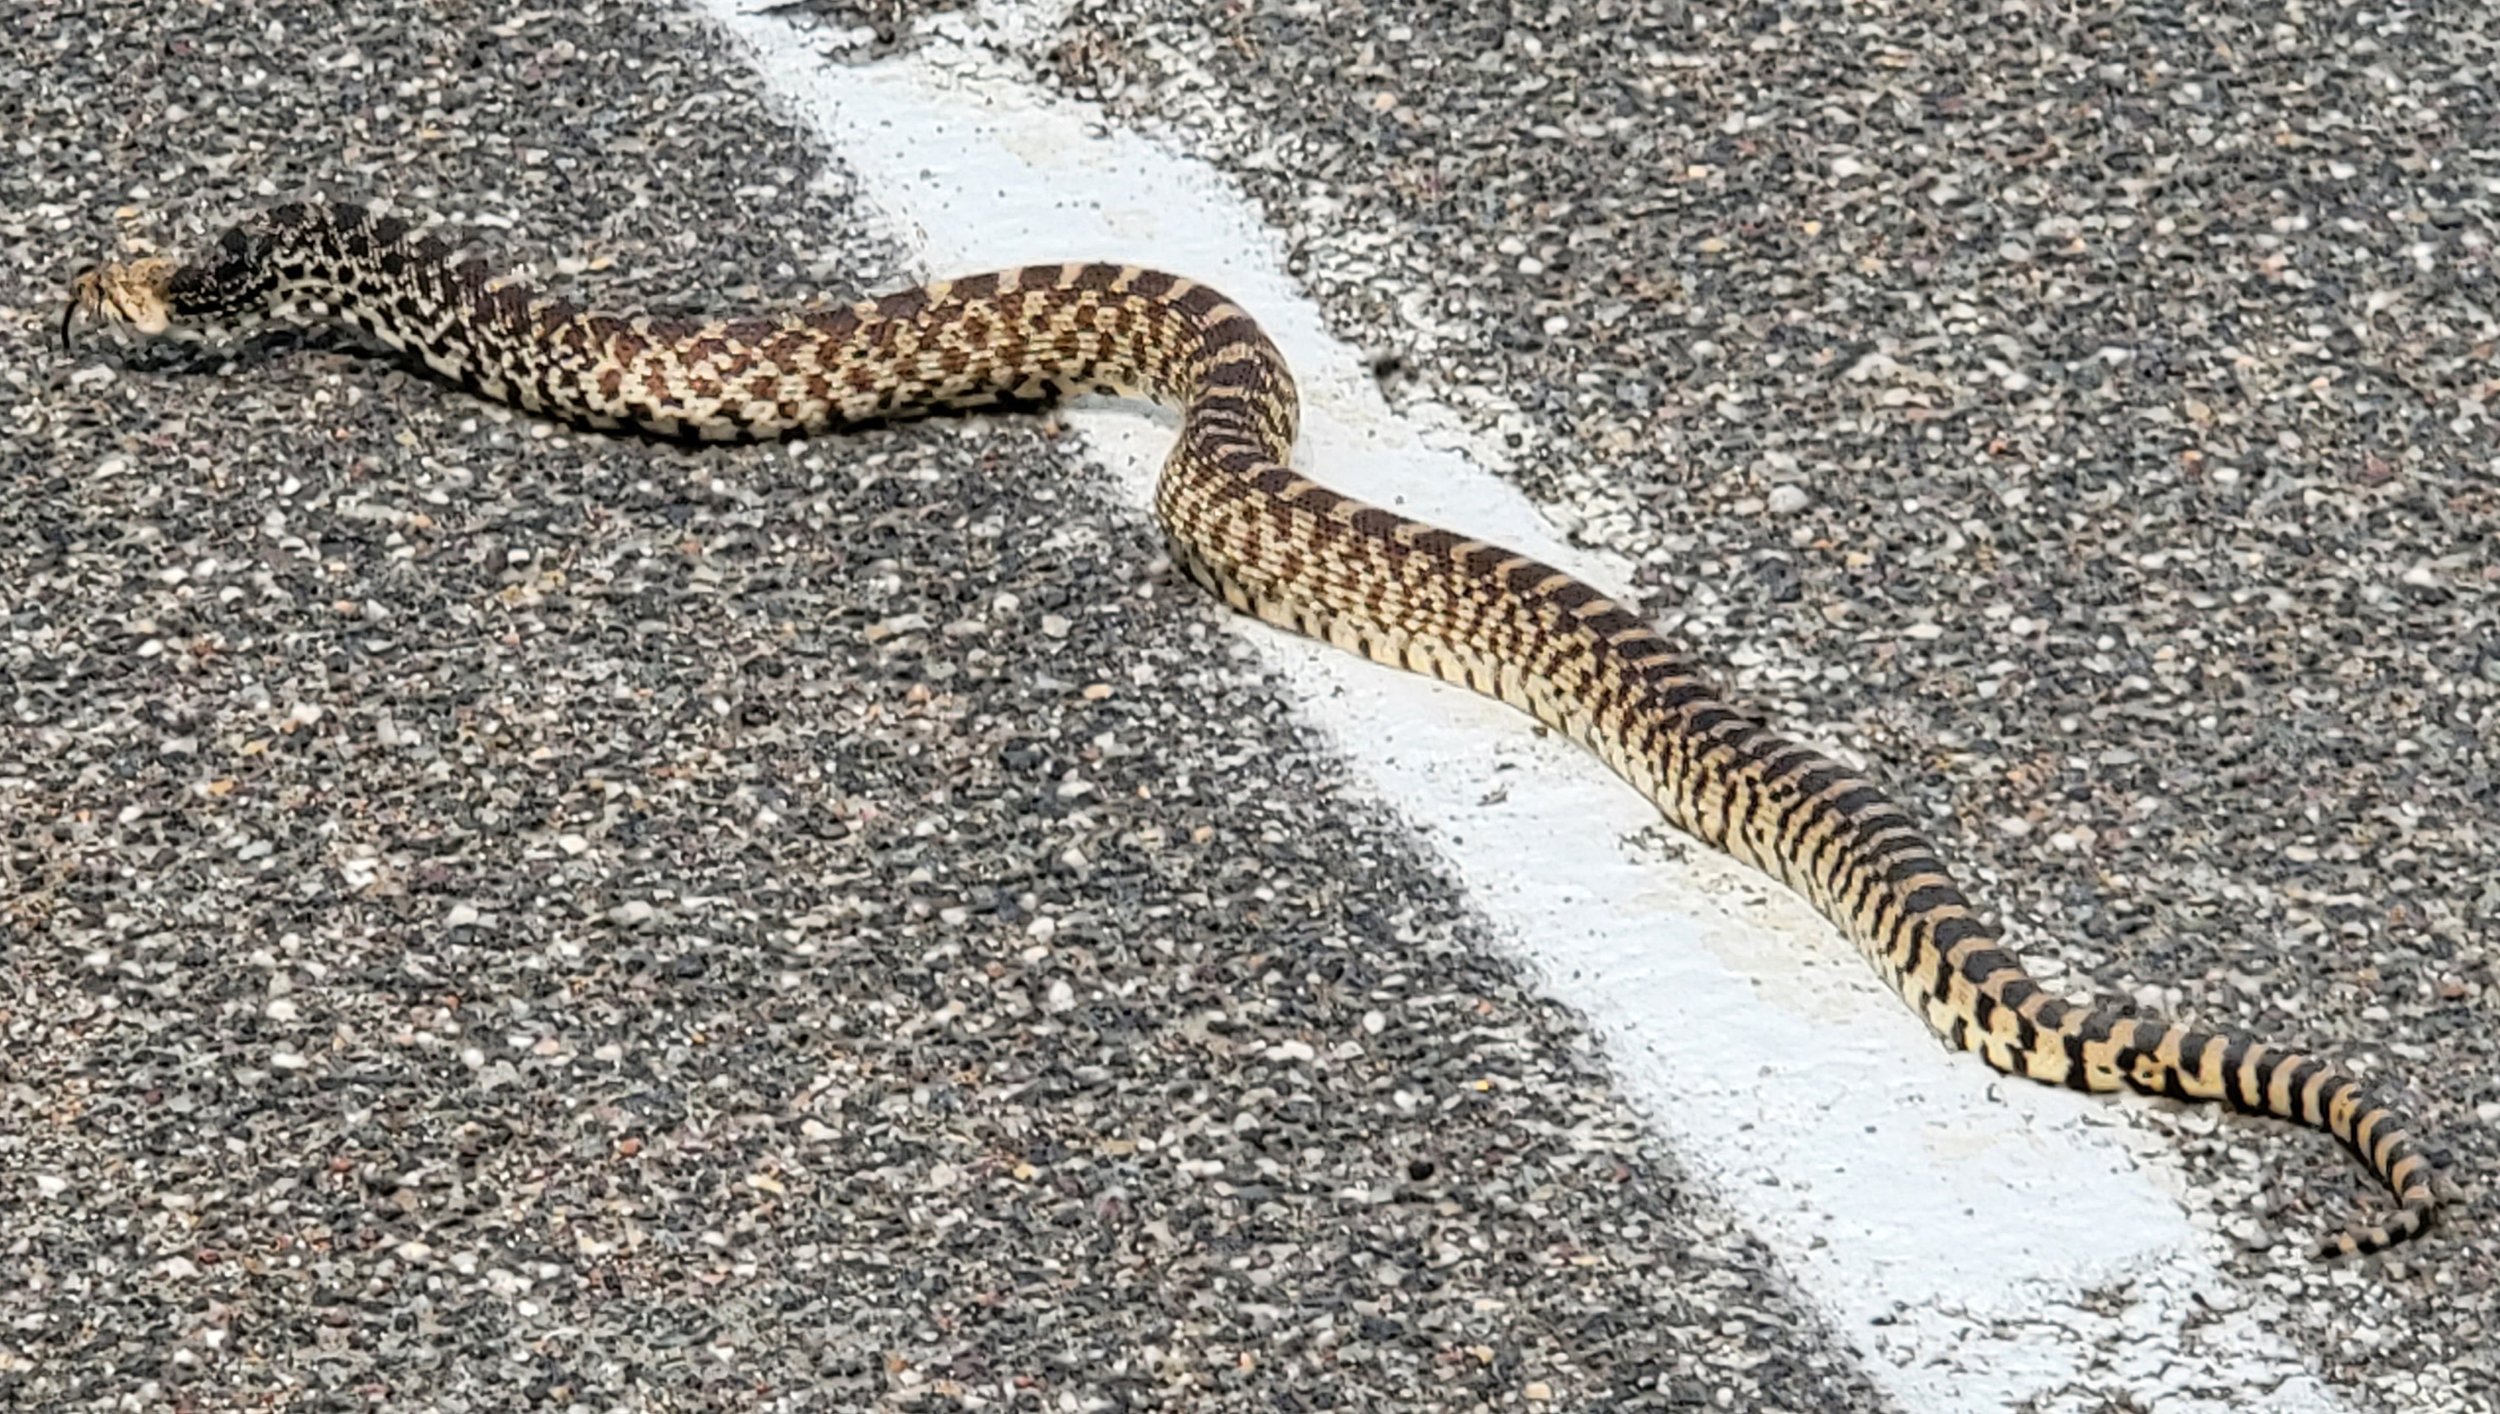 Passed right by this gopher snake while biking on the highway. He lunged at my foot.